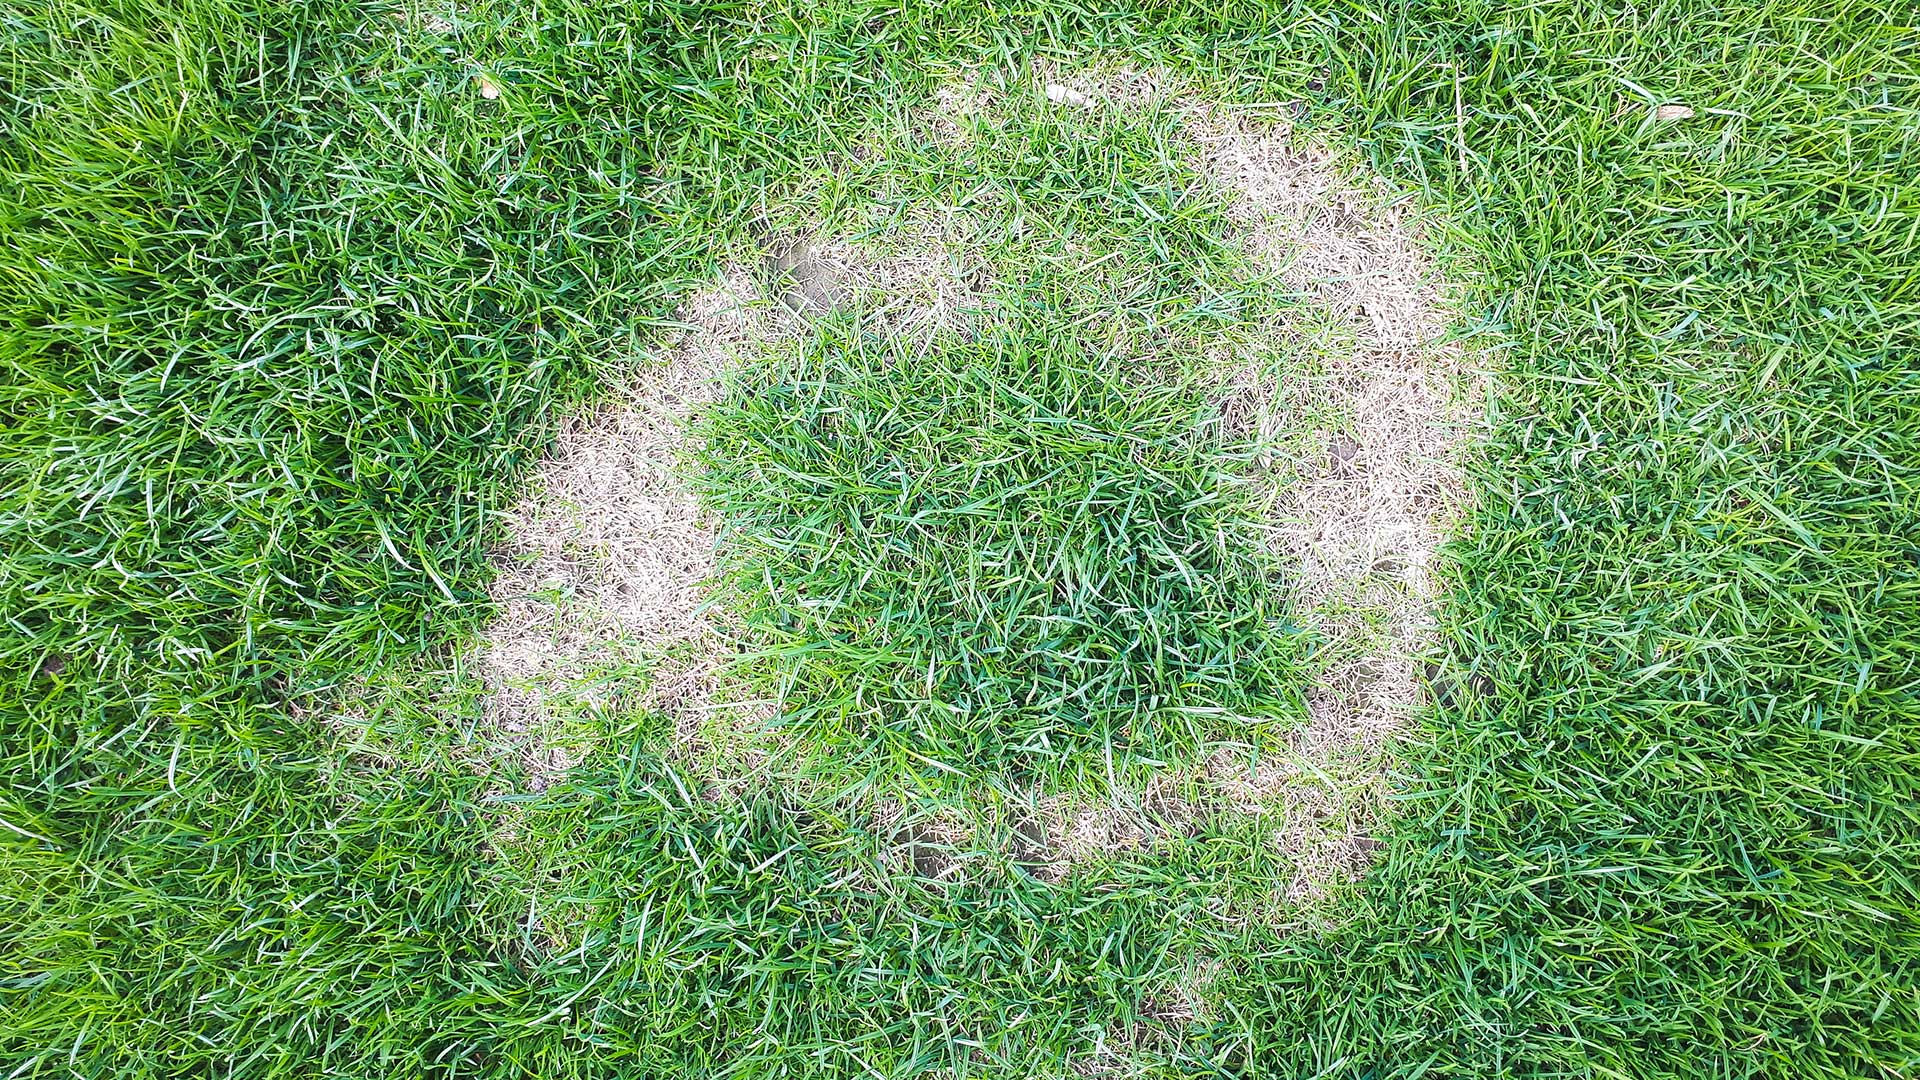 3 Ways You Might Be Causing Necrotic Ring Spot to Form on Your Lawn